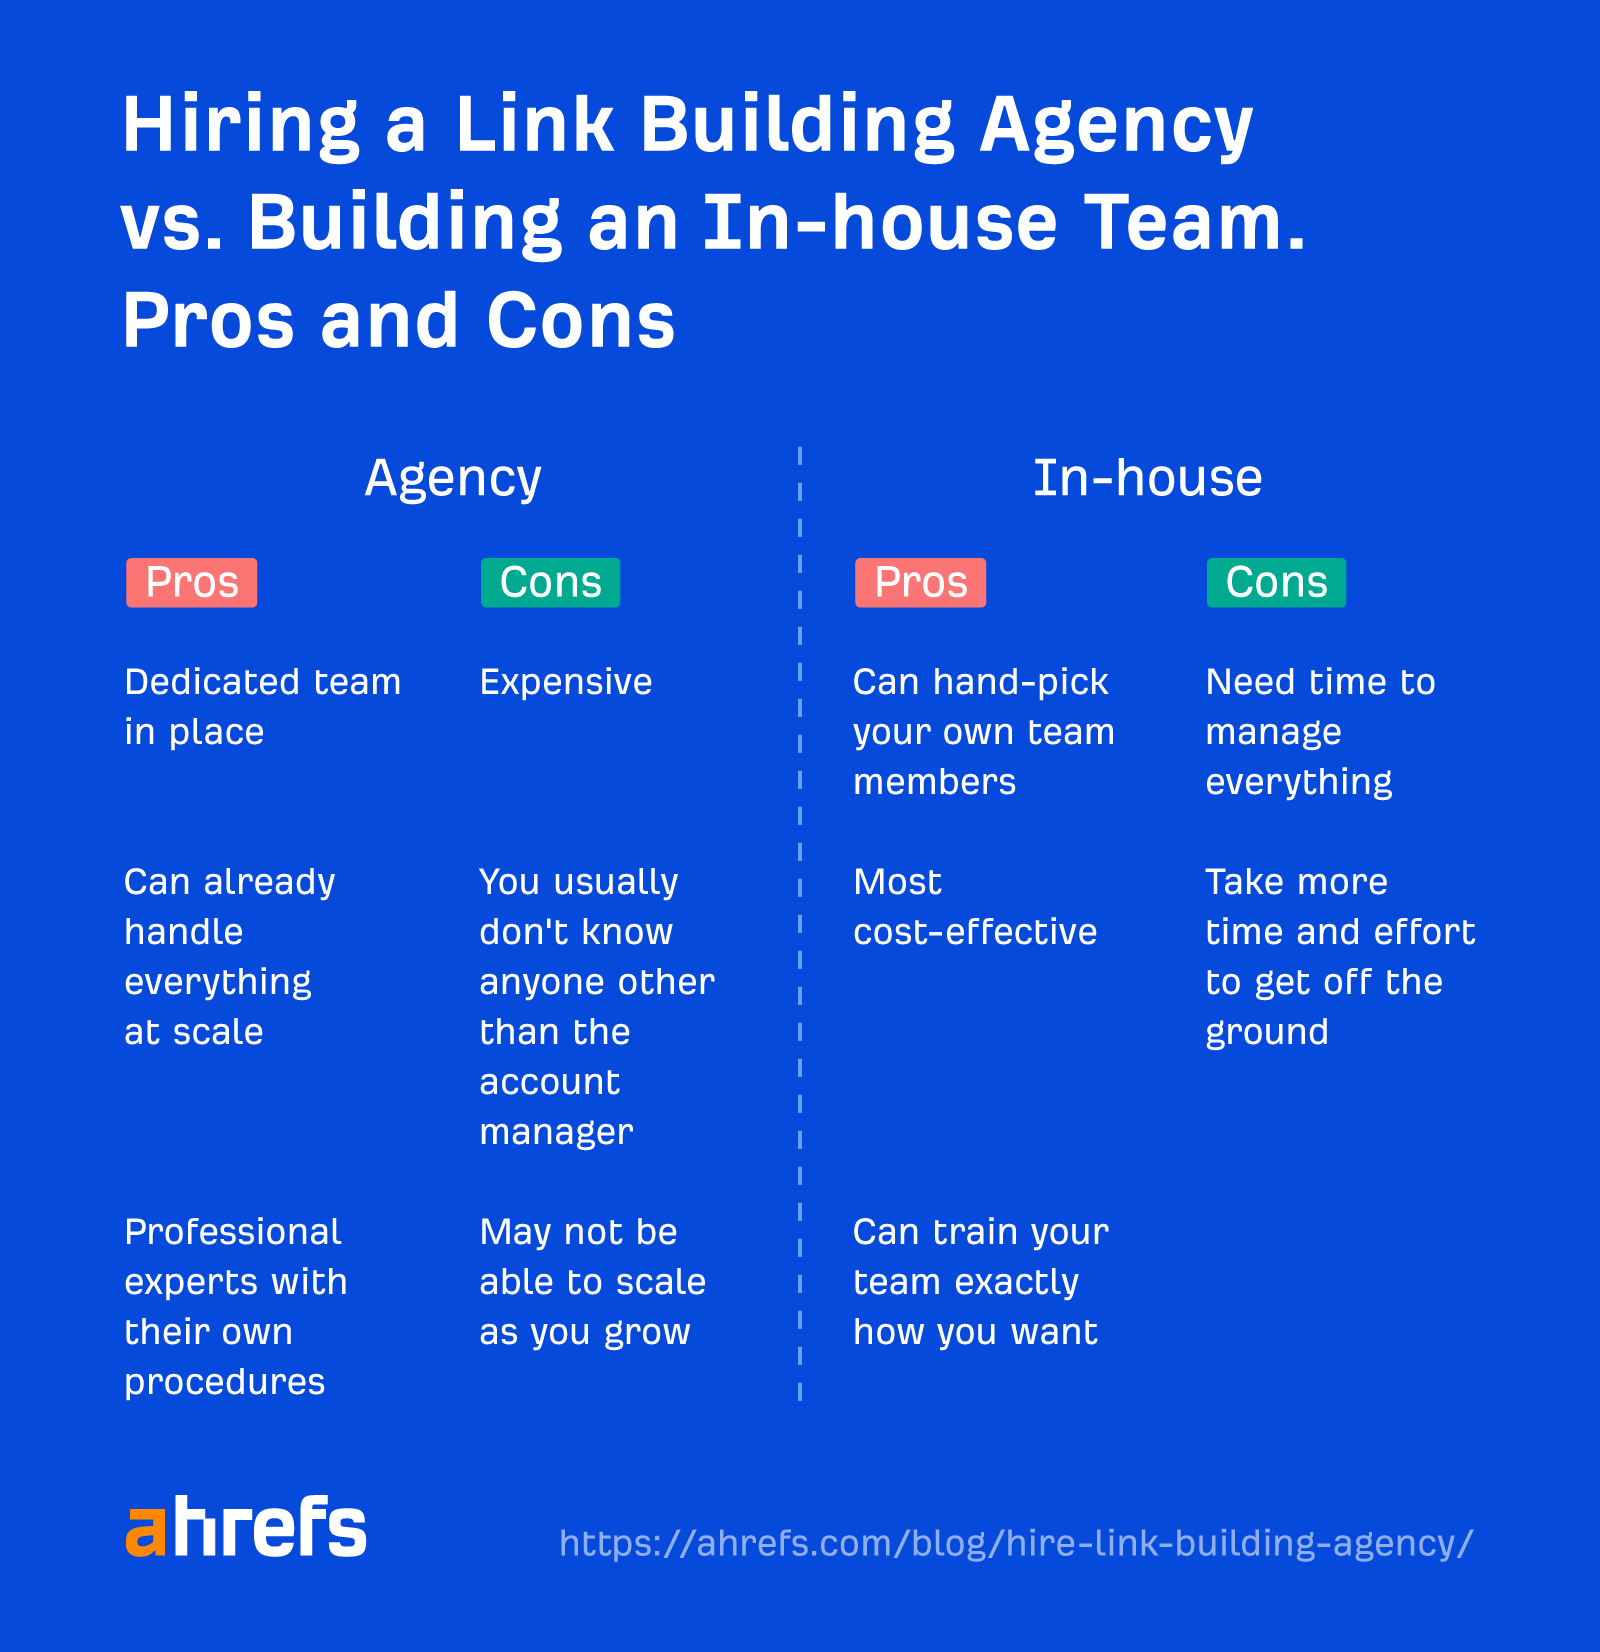 Pros and cons of hiring a link building agency vs. building an in-house team 